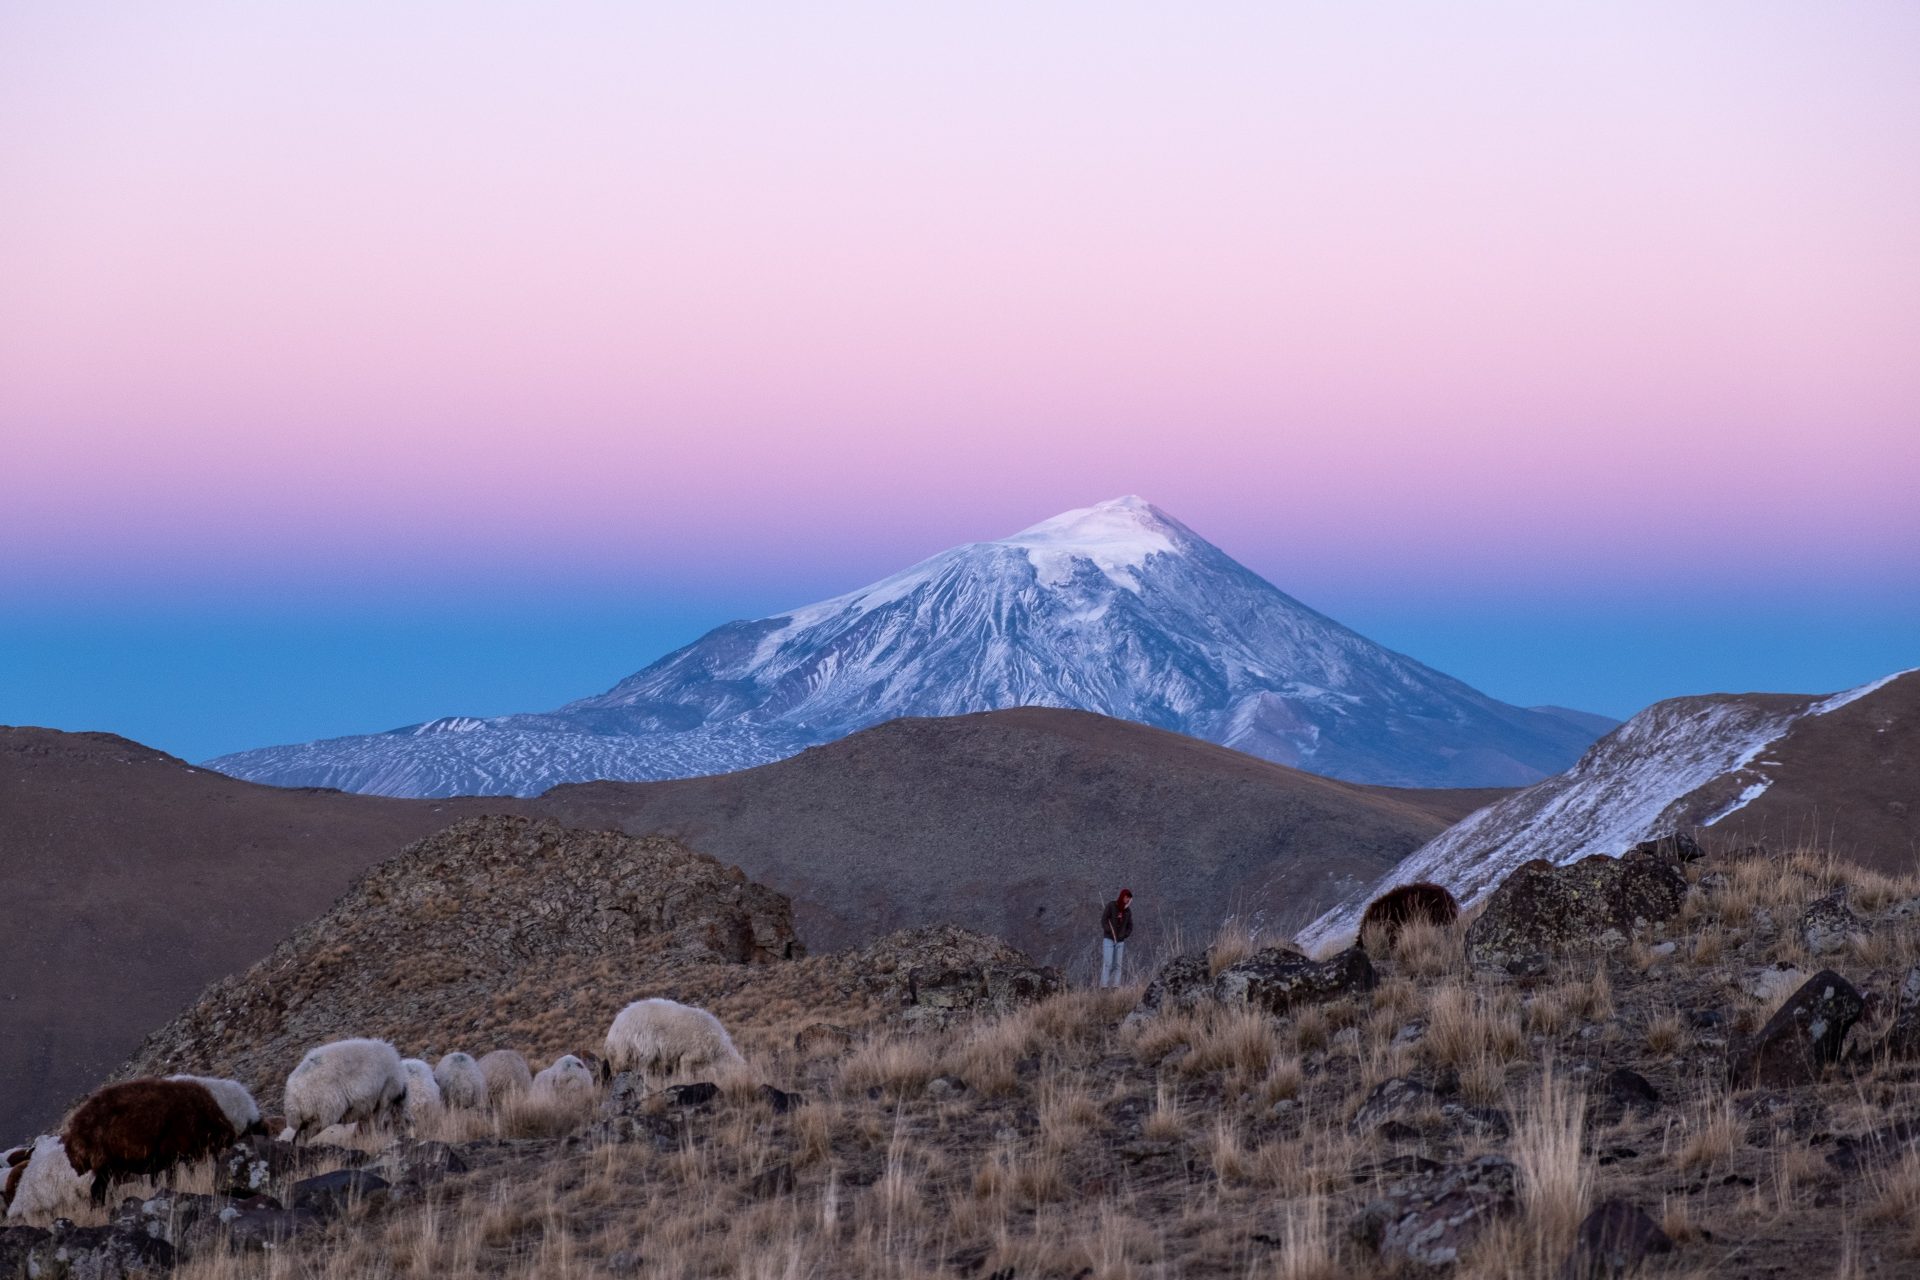 <p>The aforementioned 2010 article referred to an expedition that claimed to have found remains of Noah's Ark on Mount Ararat, located in the area of Turkey bordering Armenia and Iran. This mountain is almost always mentioned as the place where Noah landed after the flood.</p> <p>Image: Daniel Born / Unsplash</p>